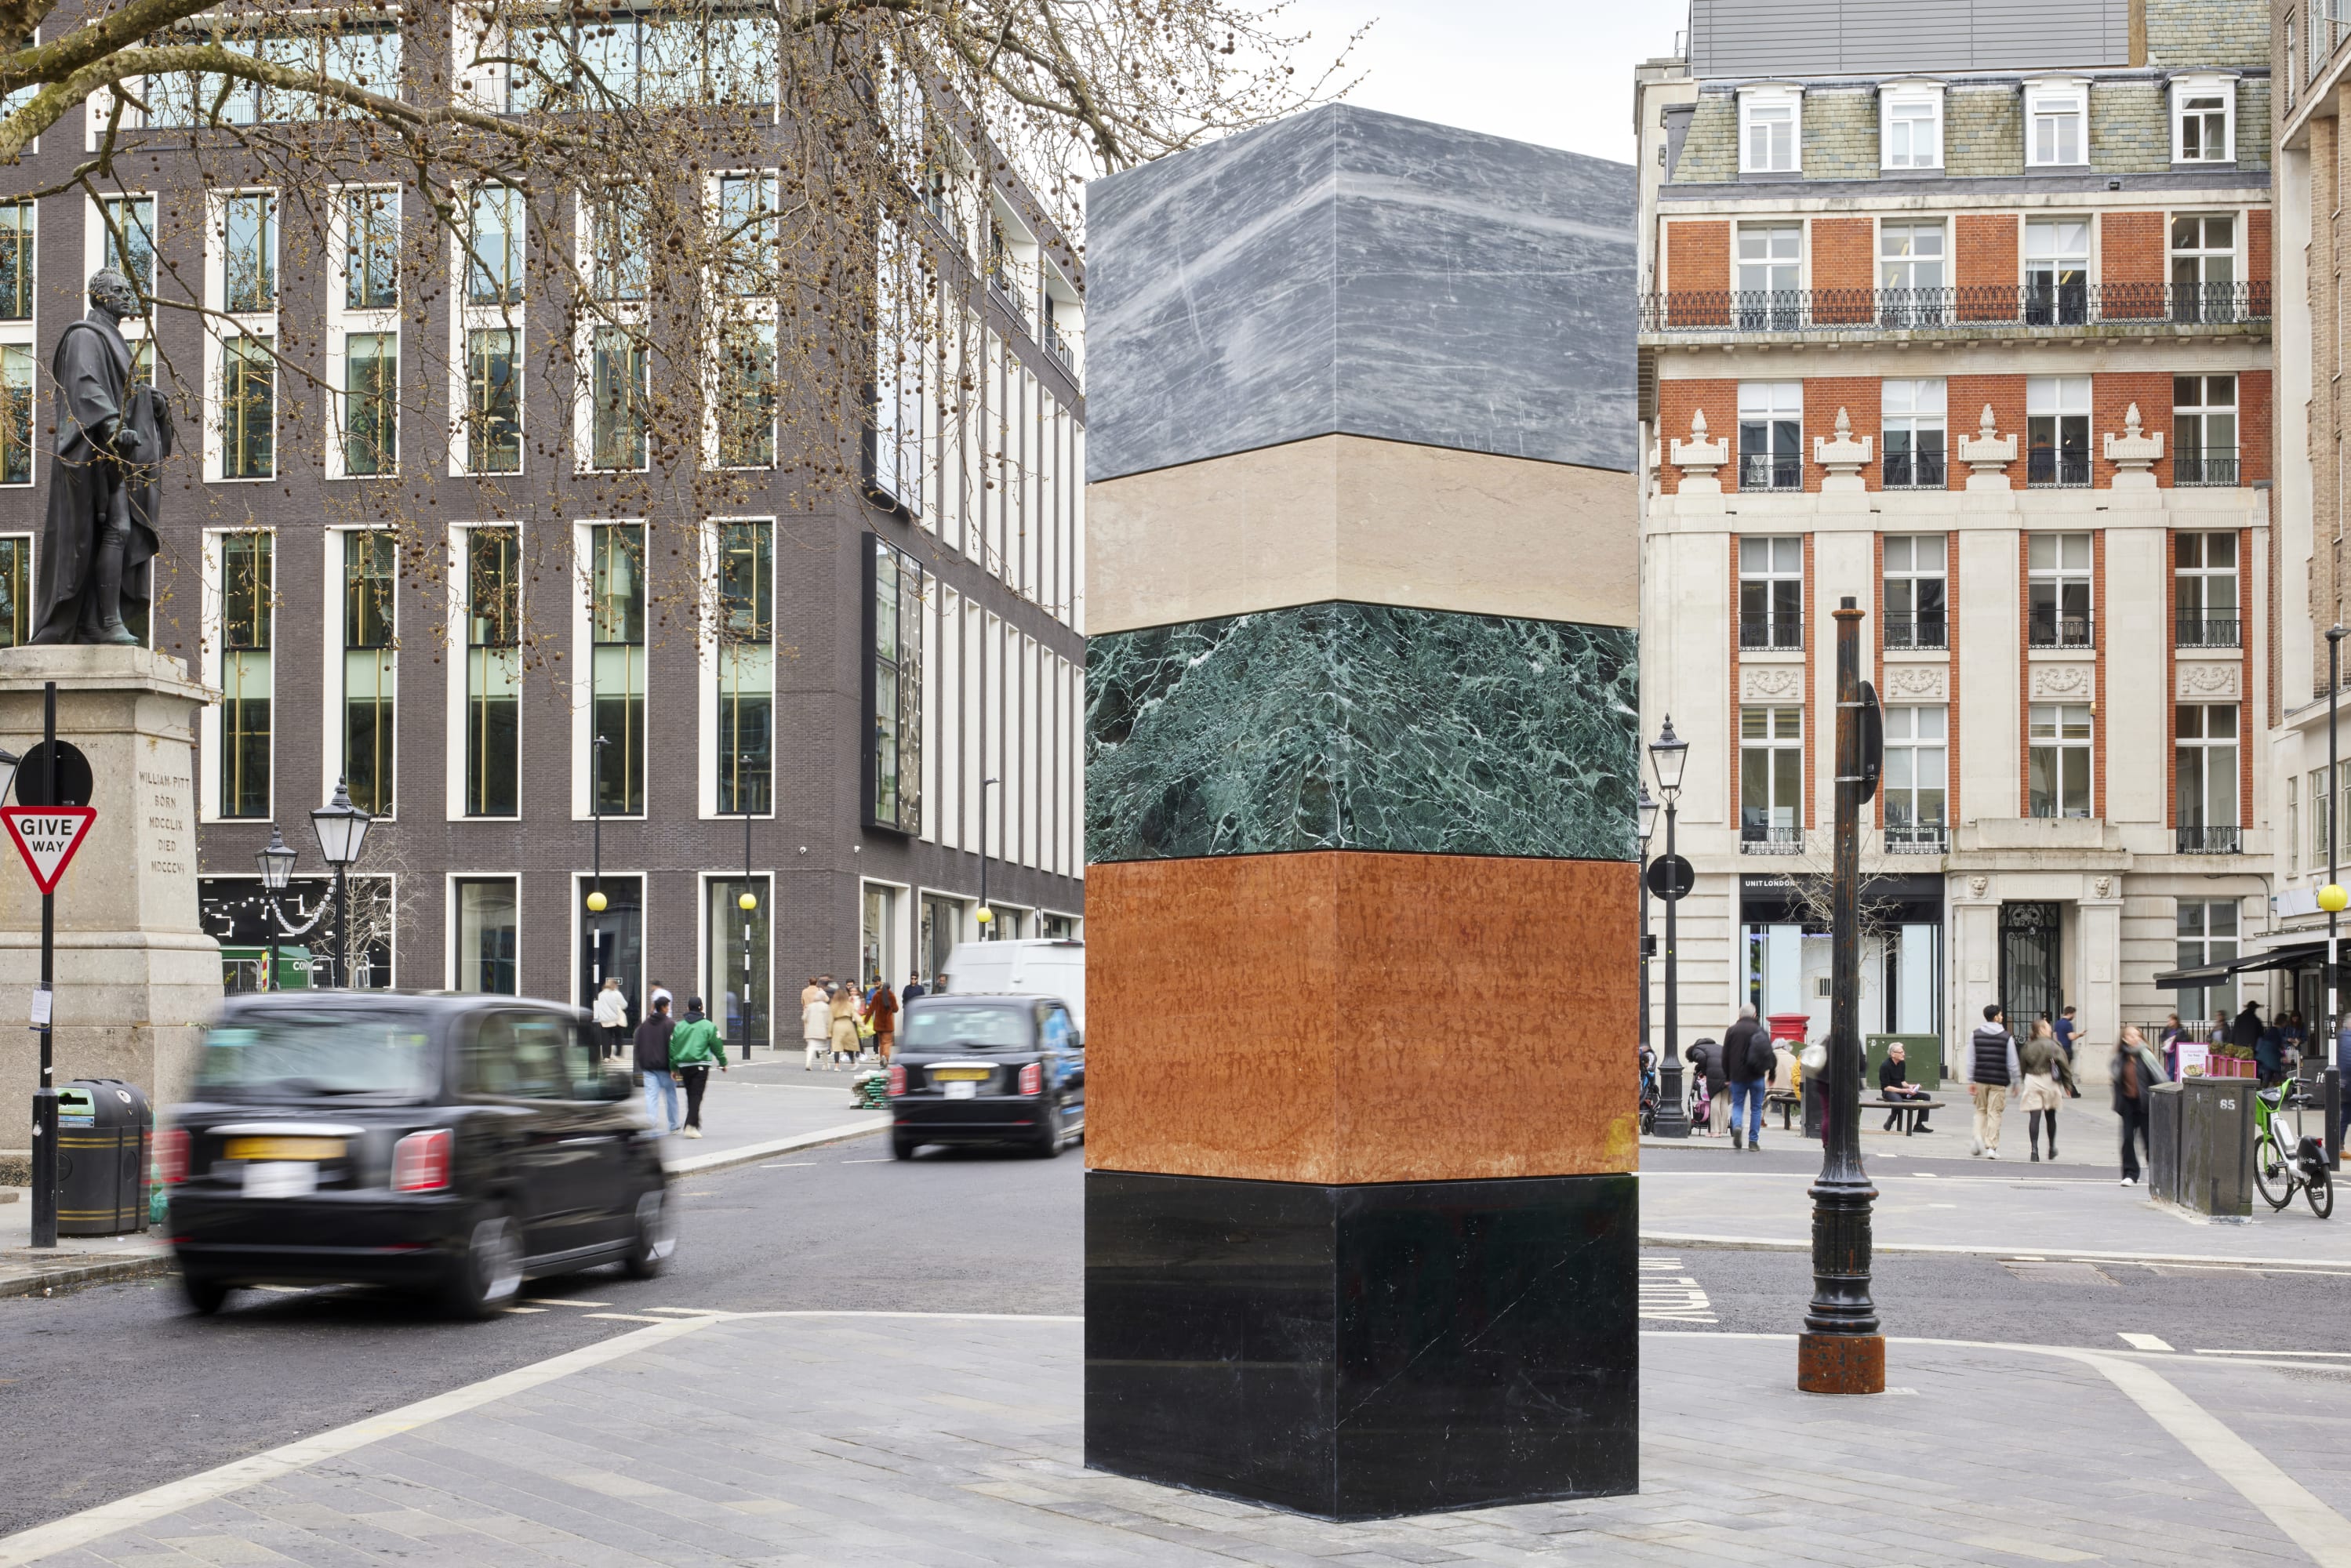 Major new work by Sean Scully in Hanover Square, London